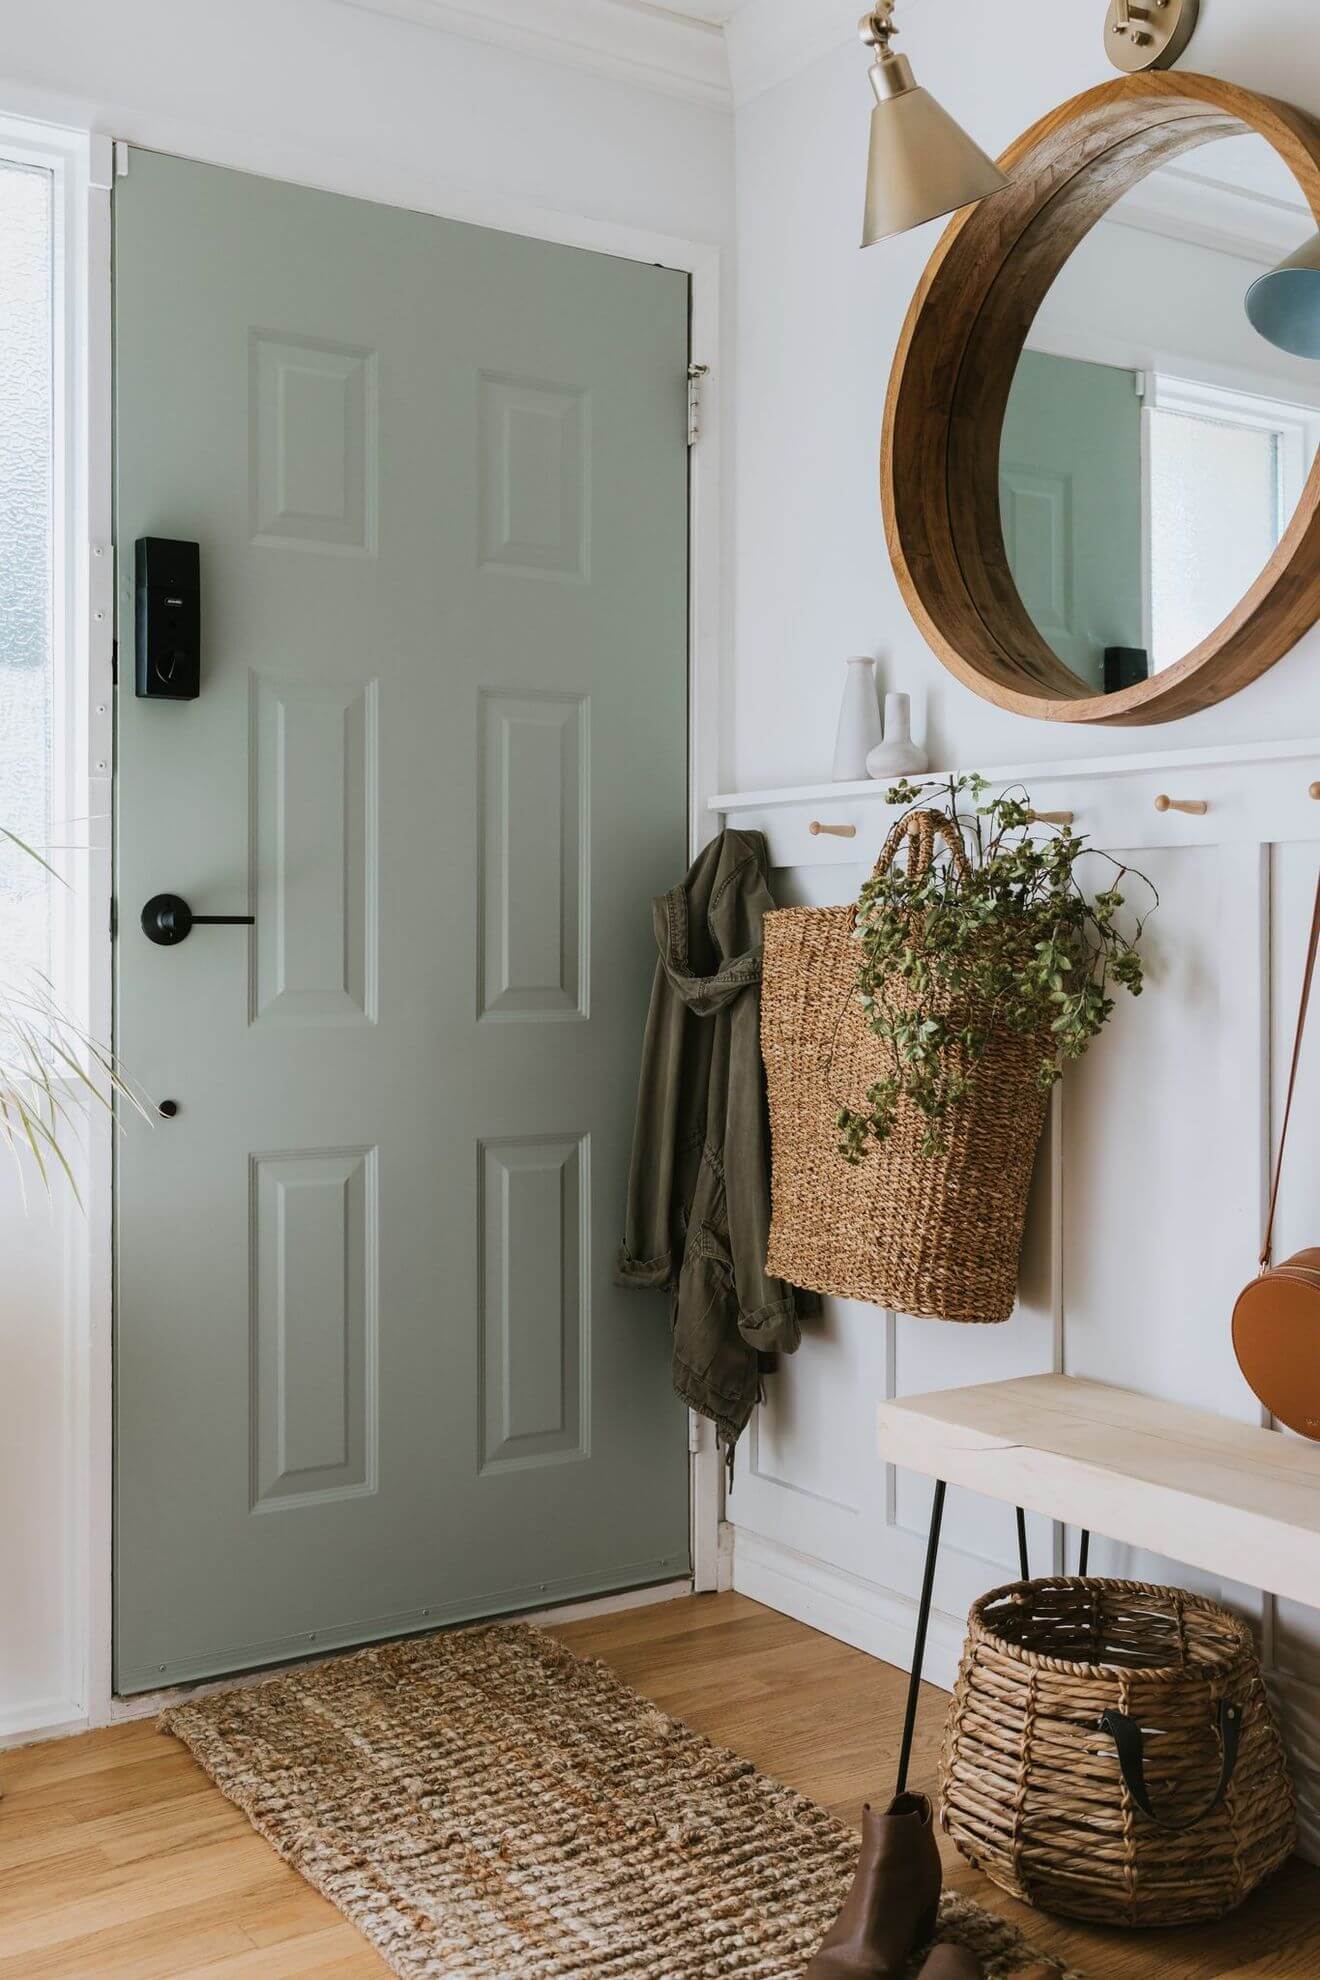 7- Sage green on the door for a soft entrance